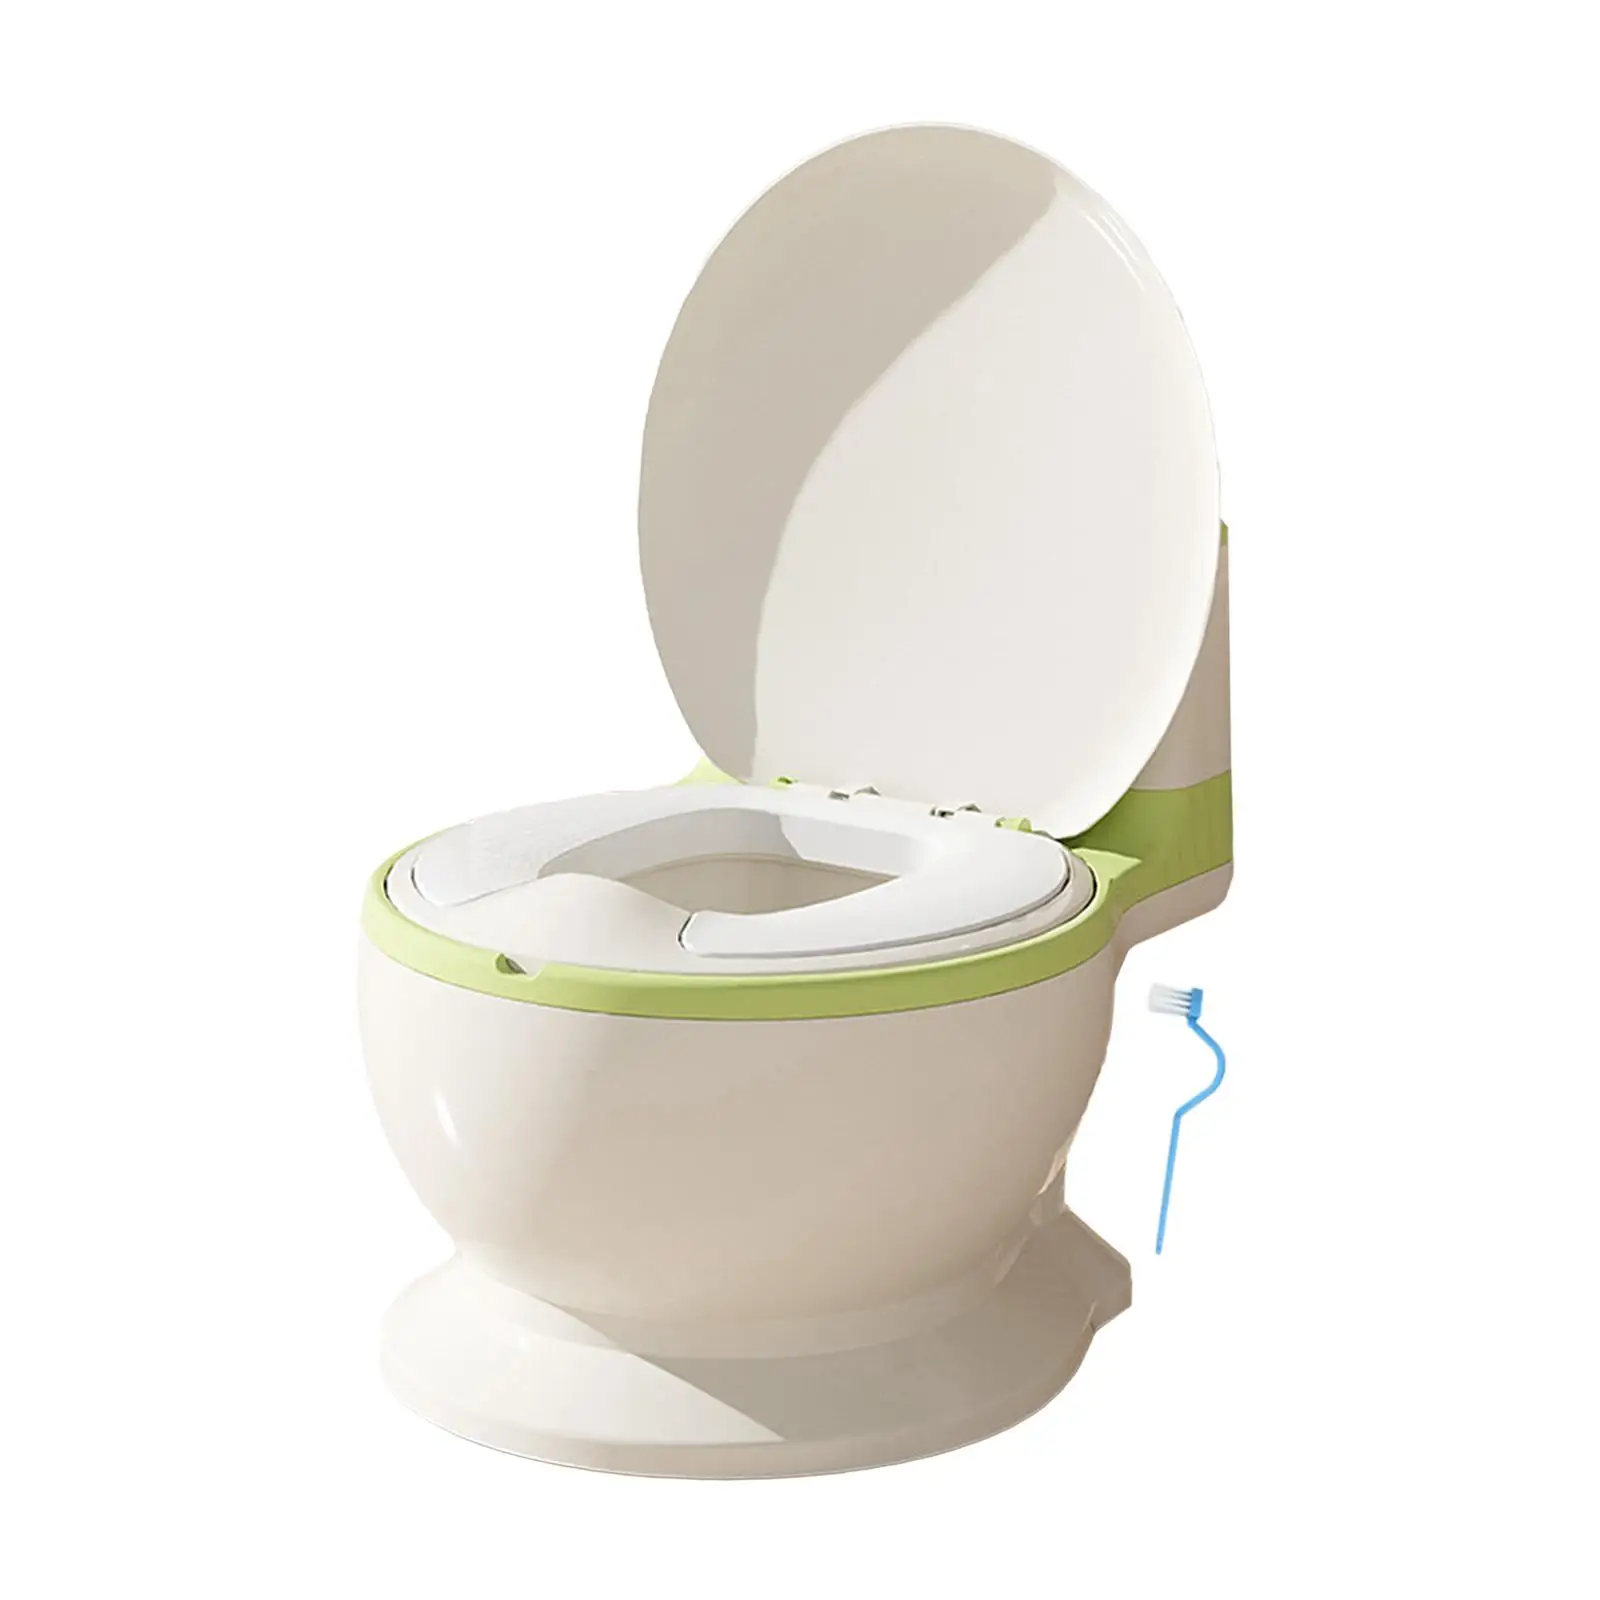 Toilet Training Potty Simulate Flushing Sound Non Slip (Brush Included) Comfortable Easy to Clean Training Transition Potty Seat